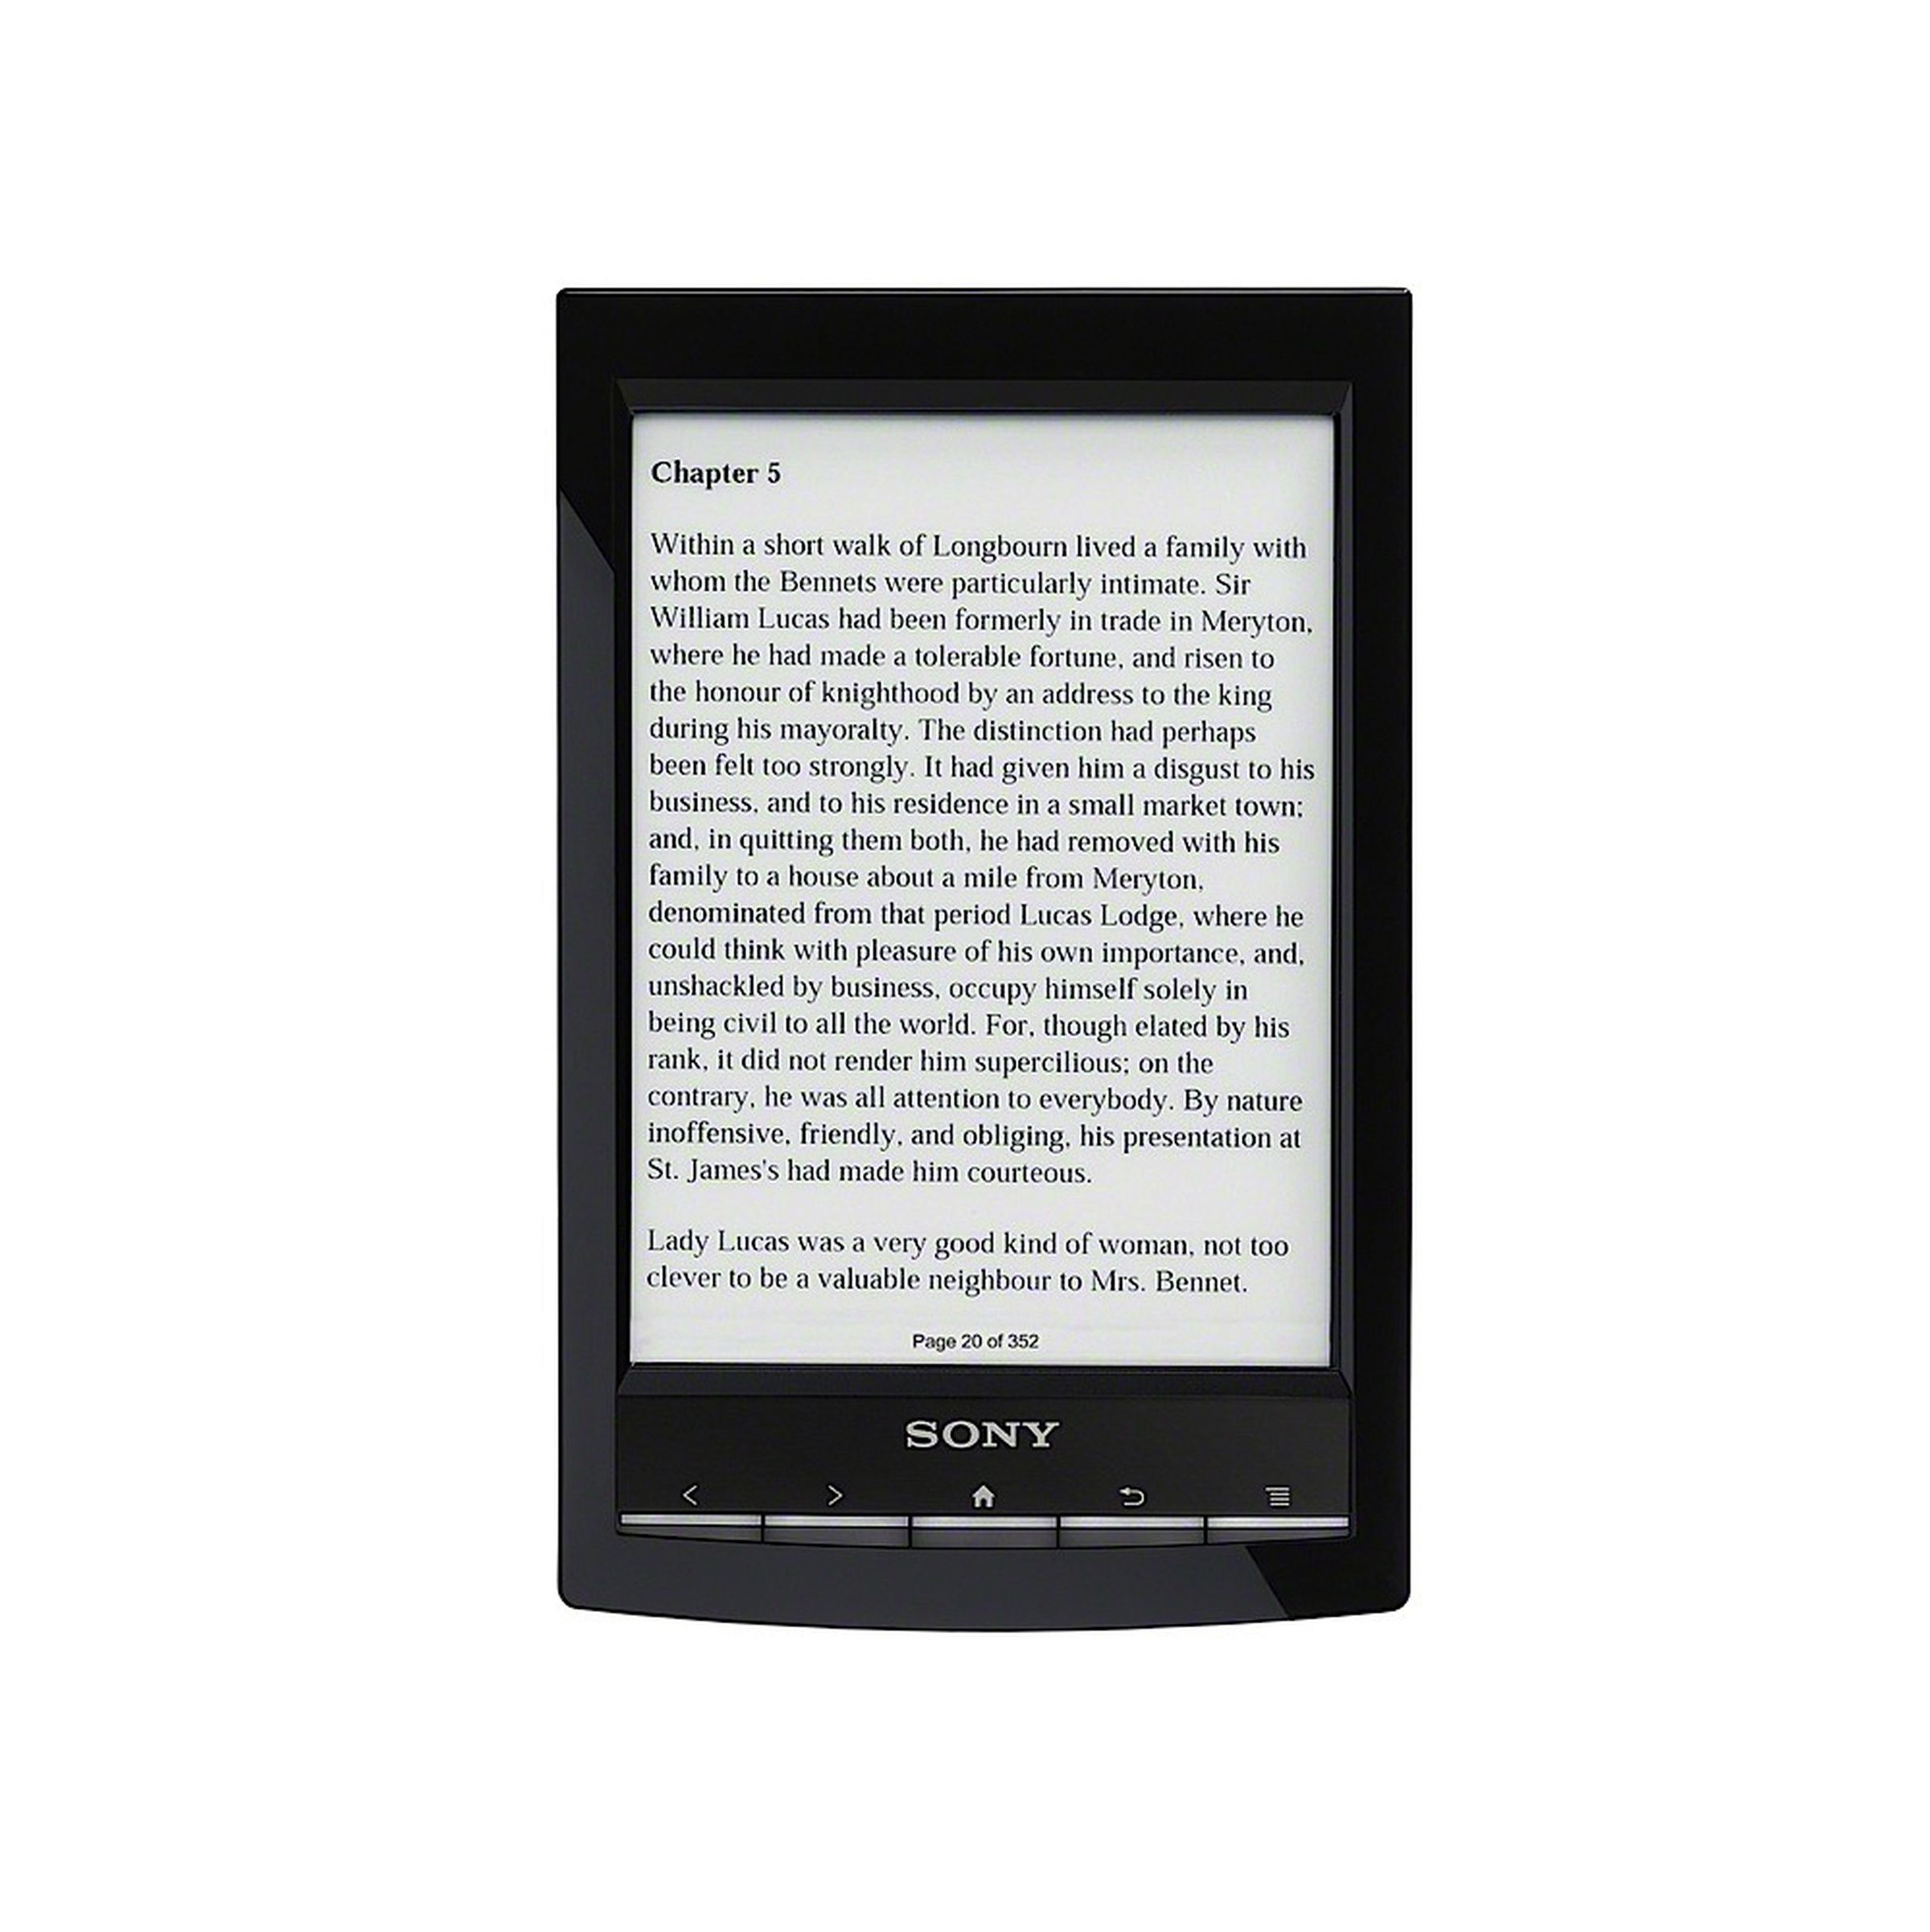 Sony Reader Wi-Fi available in October for $149 with wireless library borrowing